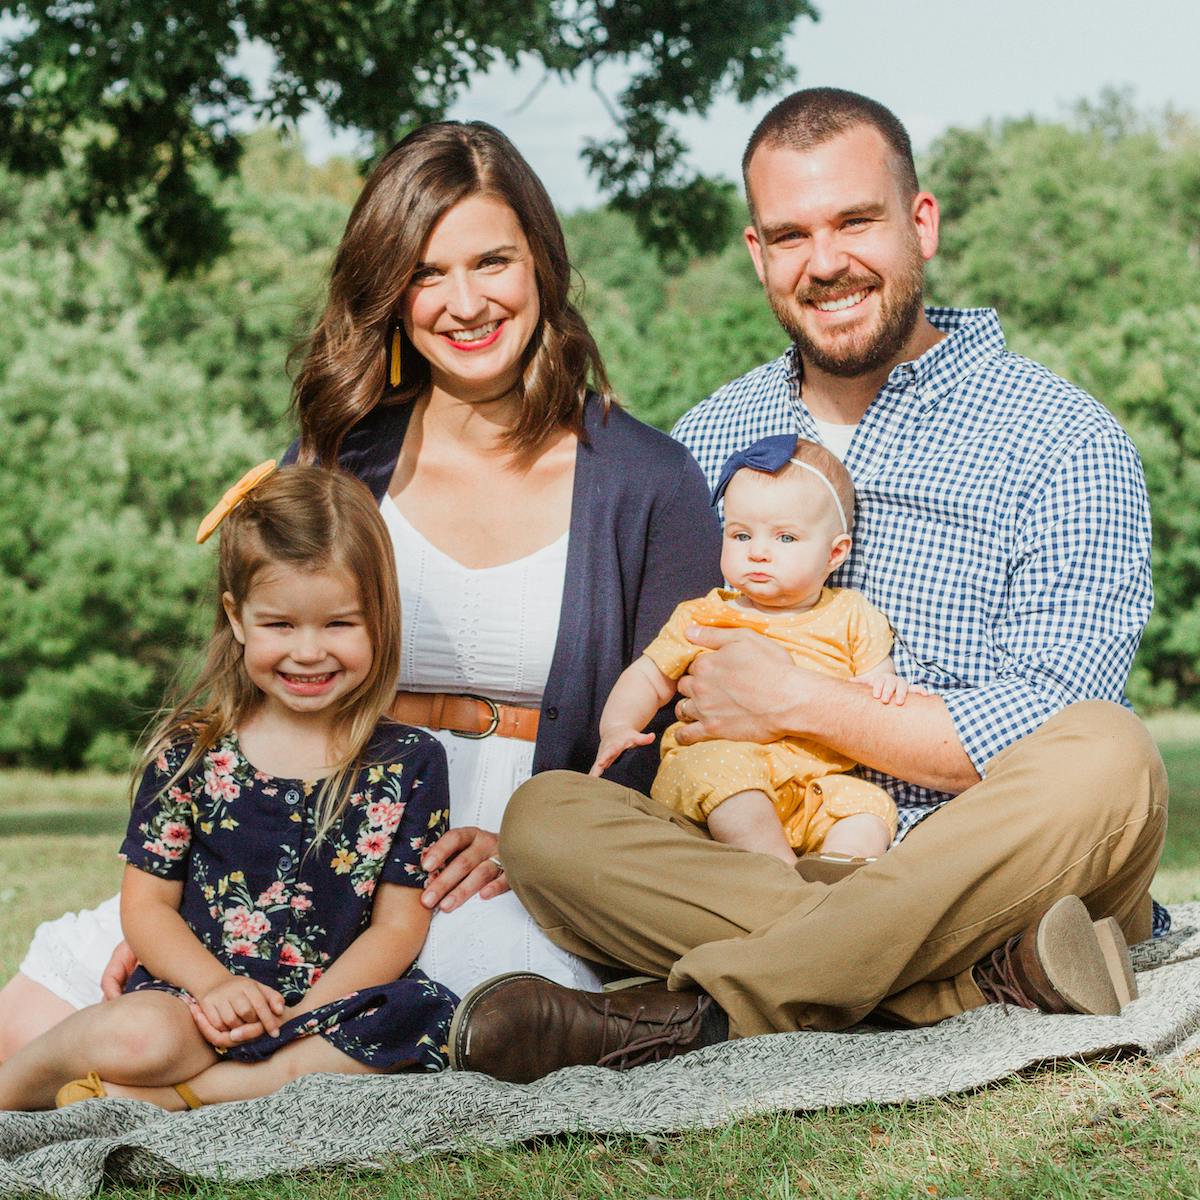 A family portrait of two adults and two children smiling and sitting on a blanket outdoors.